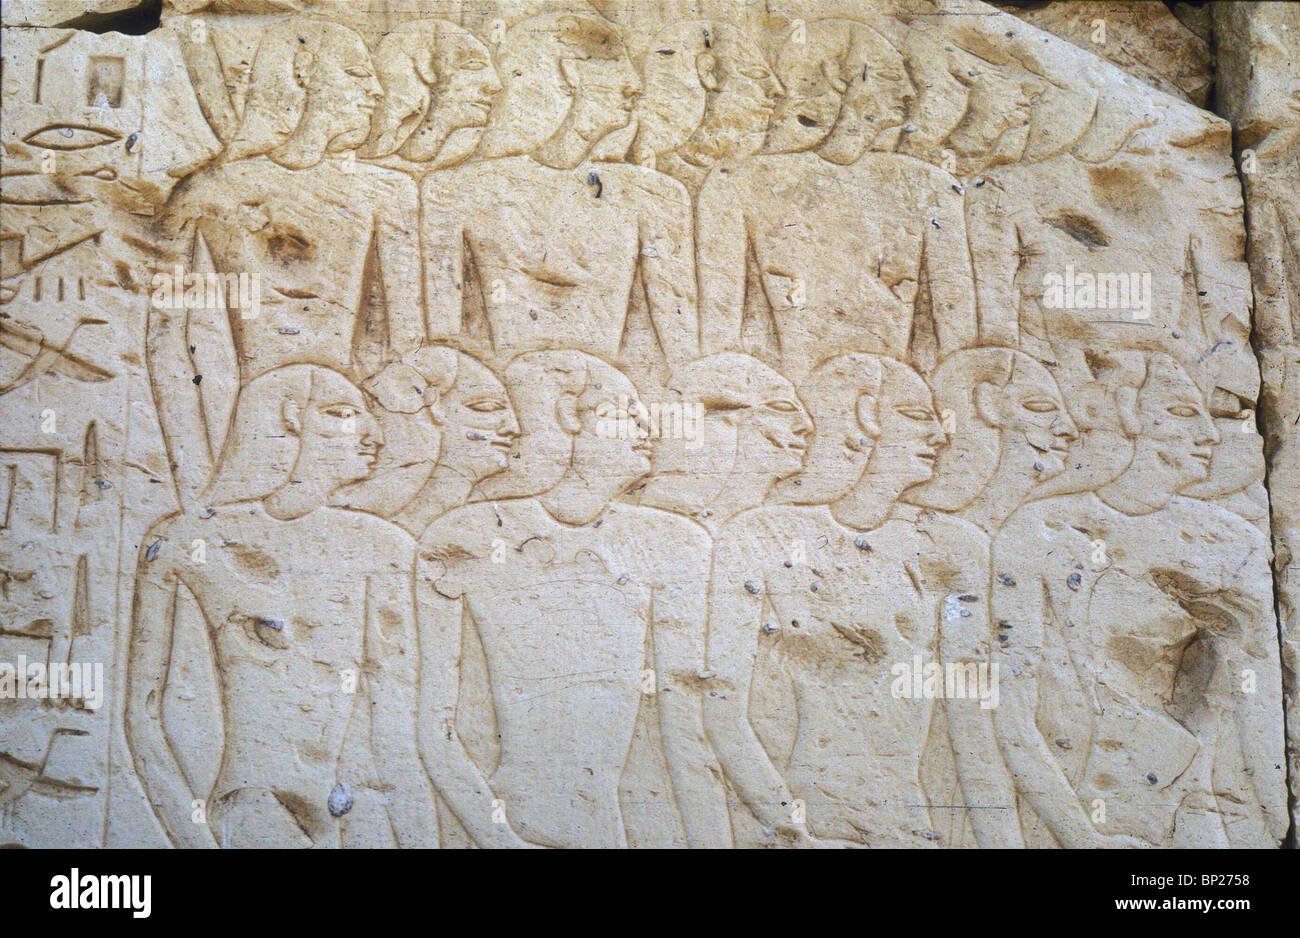 1476. HITTITE TYPES CARVED IN BAS-RELIEF IN ONE OF THE 13TH. C. BC. TOMBS IN ABIDOS (EGYPT) Stock Photo